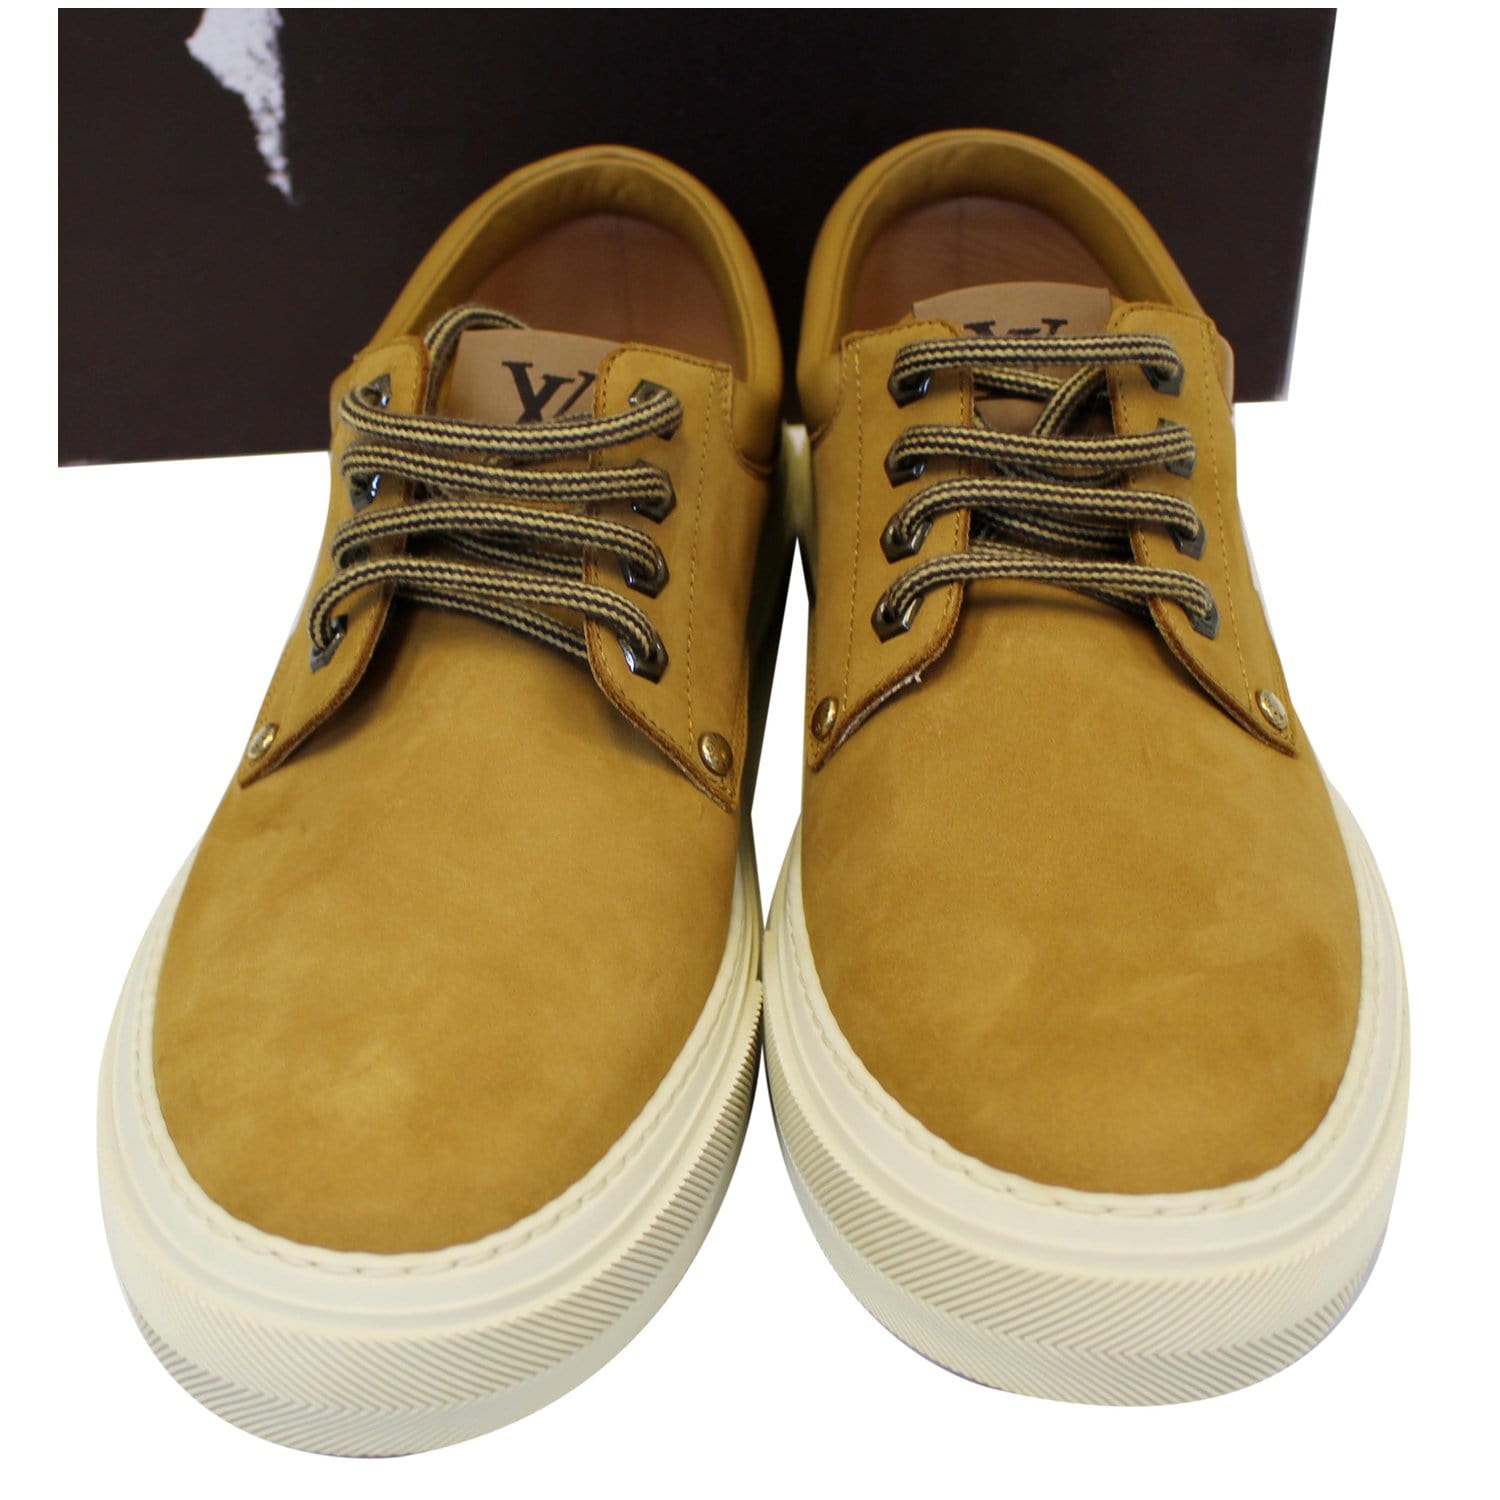 Leather lace up boots Louis Vuitton Camel size 41 EU in Leather - 32206489